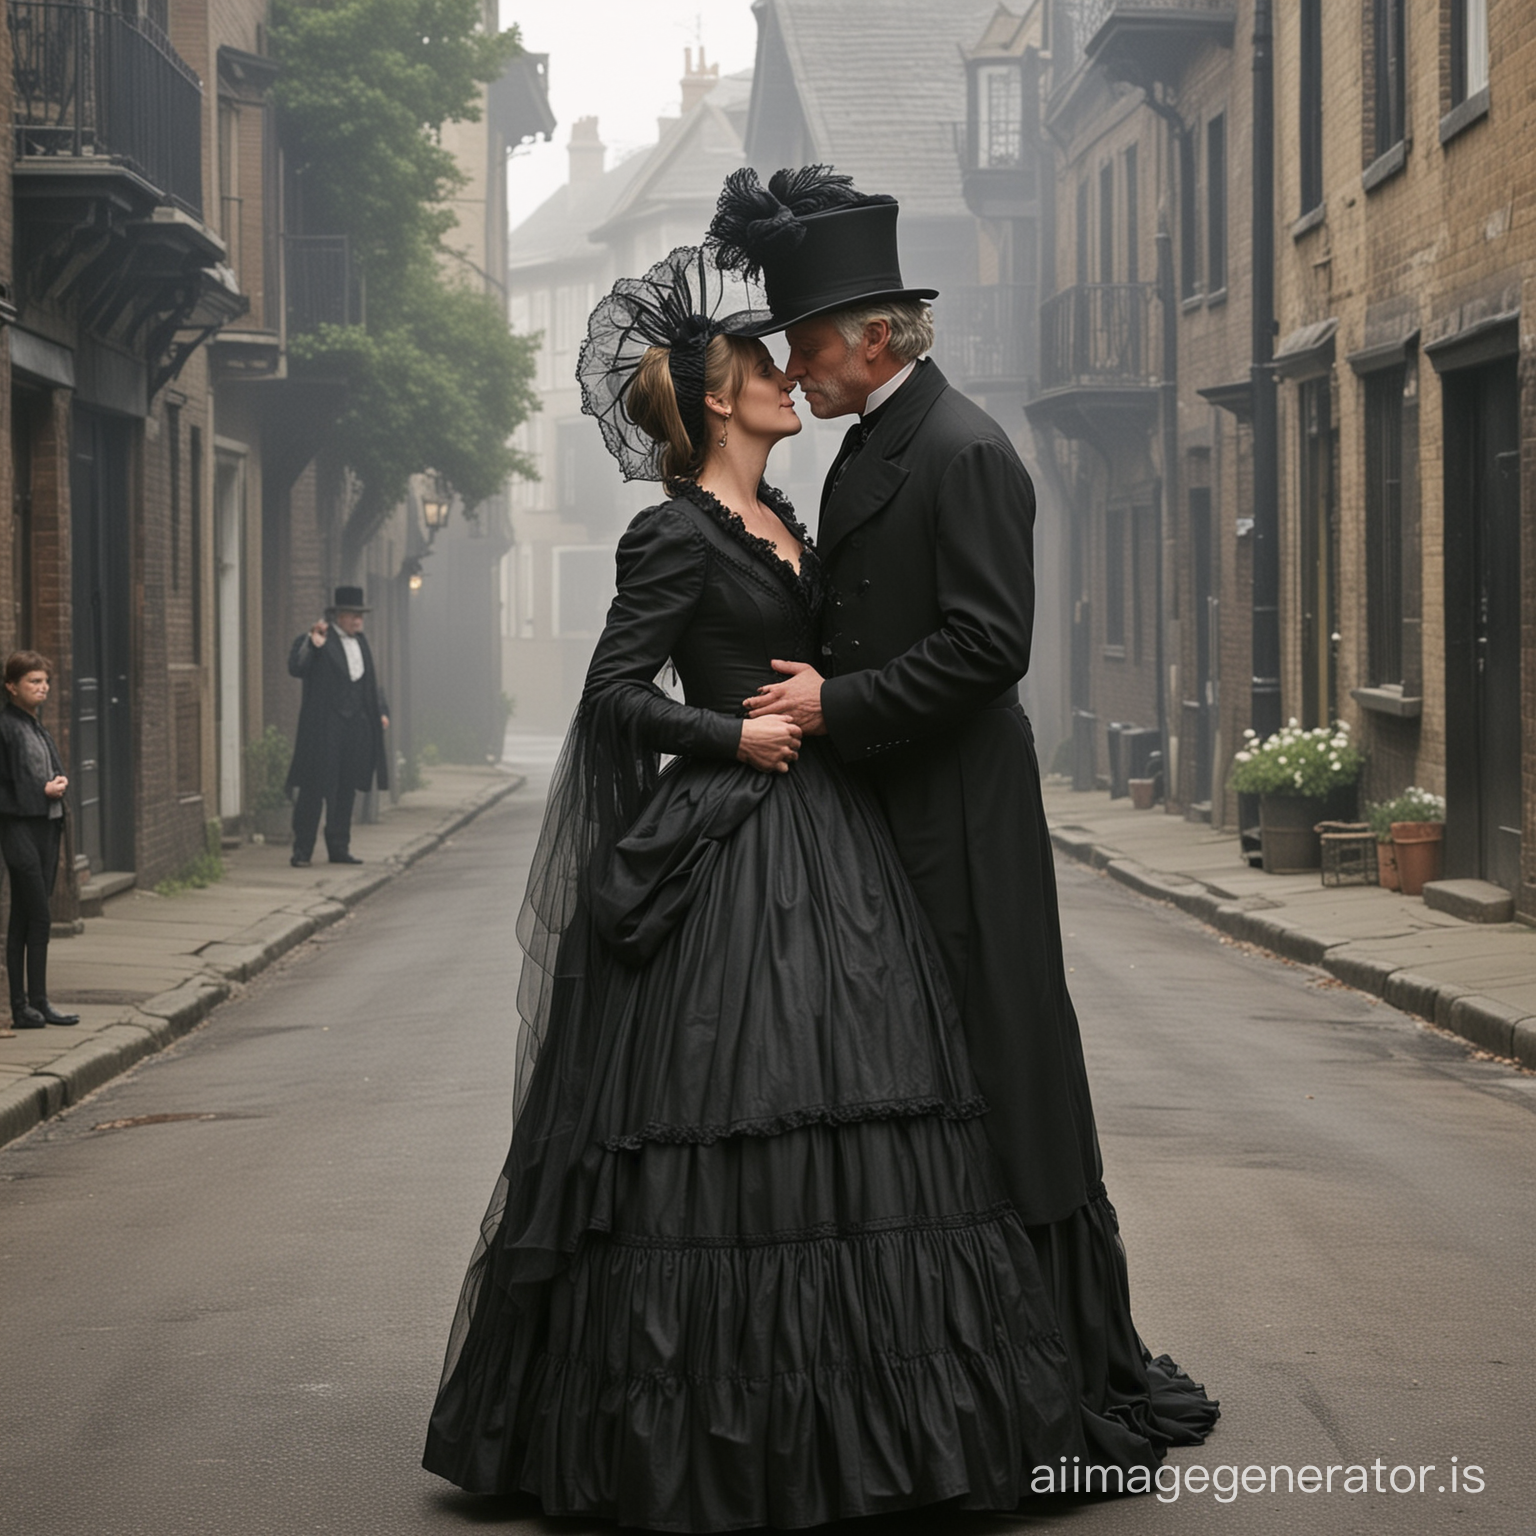 Amanda Tapping as Major Samantha Carter wearing a black floor-length loose billowing 1860 Victorian crinoline poofy dress with a frilly bonnet on a Victorian era street kissing an old man dressed into a black Victorian suit who seems to be her newlywed husband